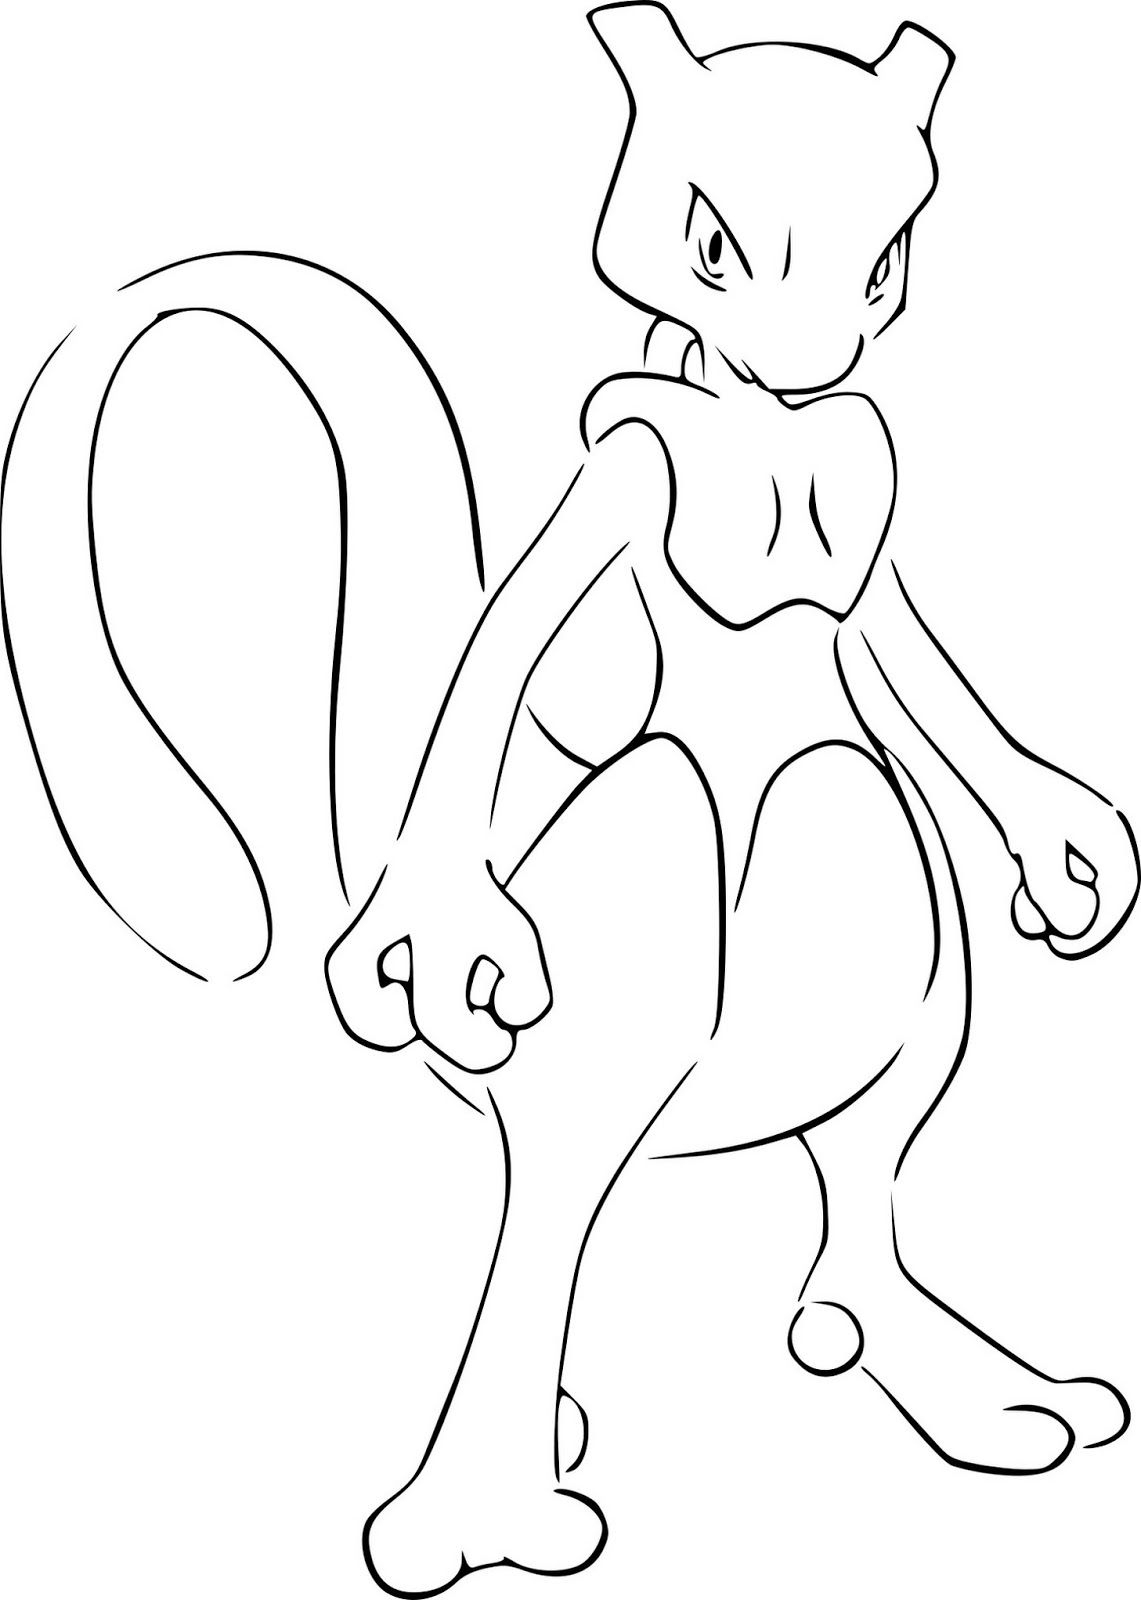 Printable Mewtwo Pokemon Coloring Pages | Pokemon Coloring Pages concernant Dessin Pokémon Mew